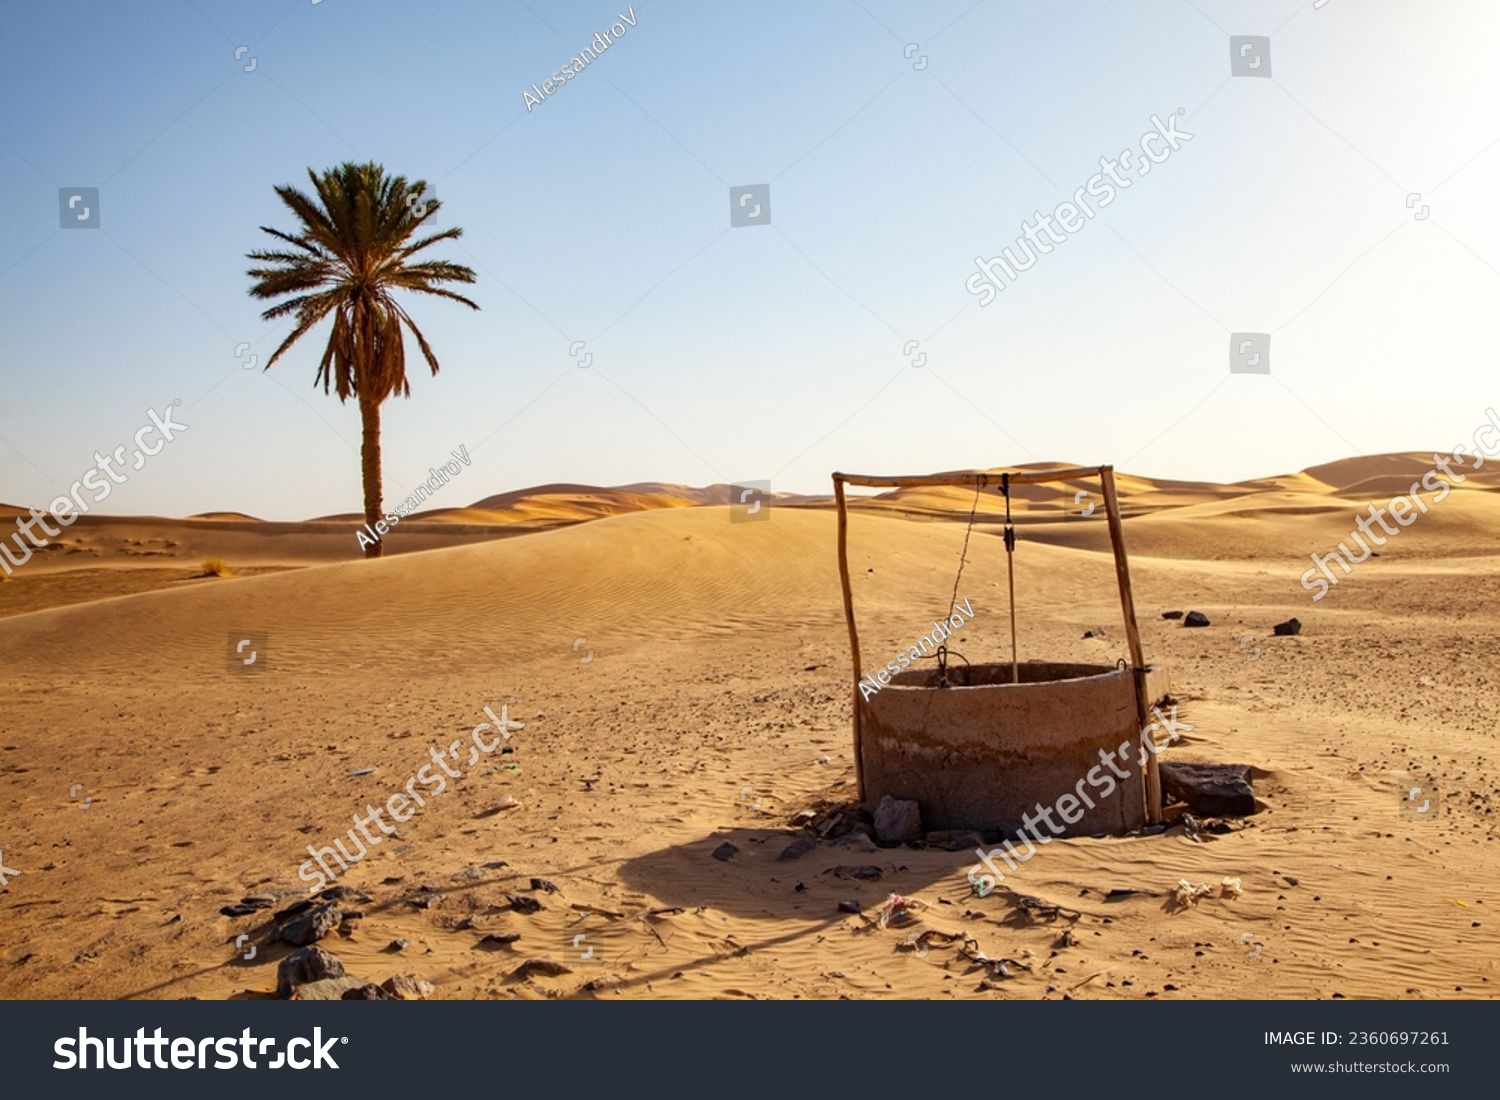 Old water well in the desert with palm tree and dunes in the background #2360697261